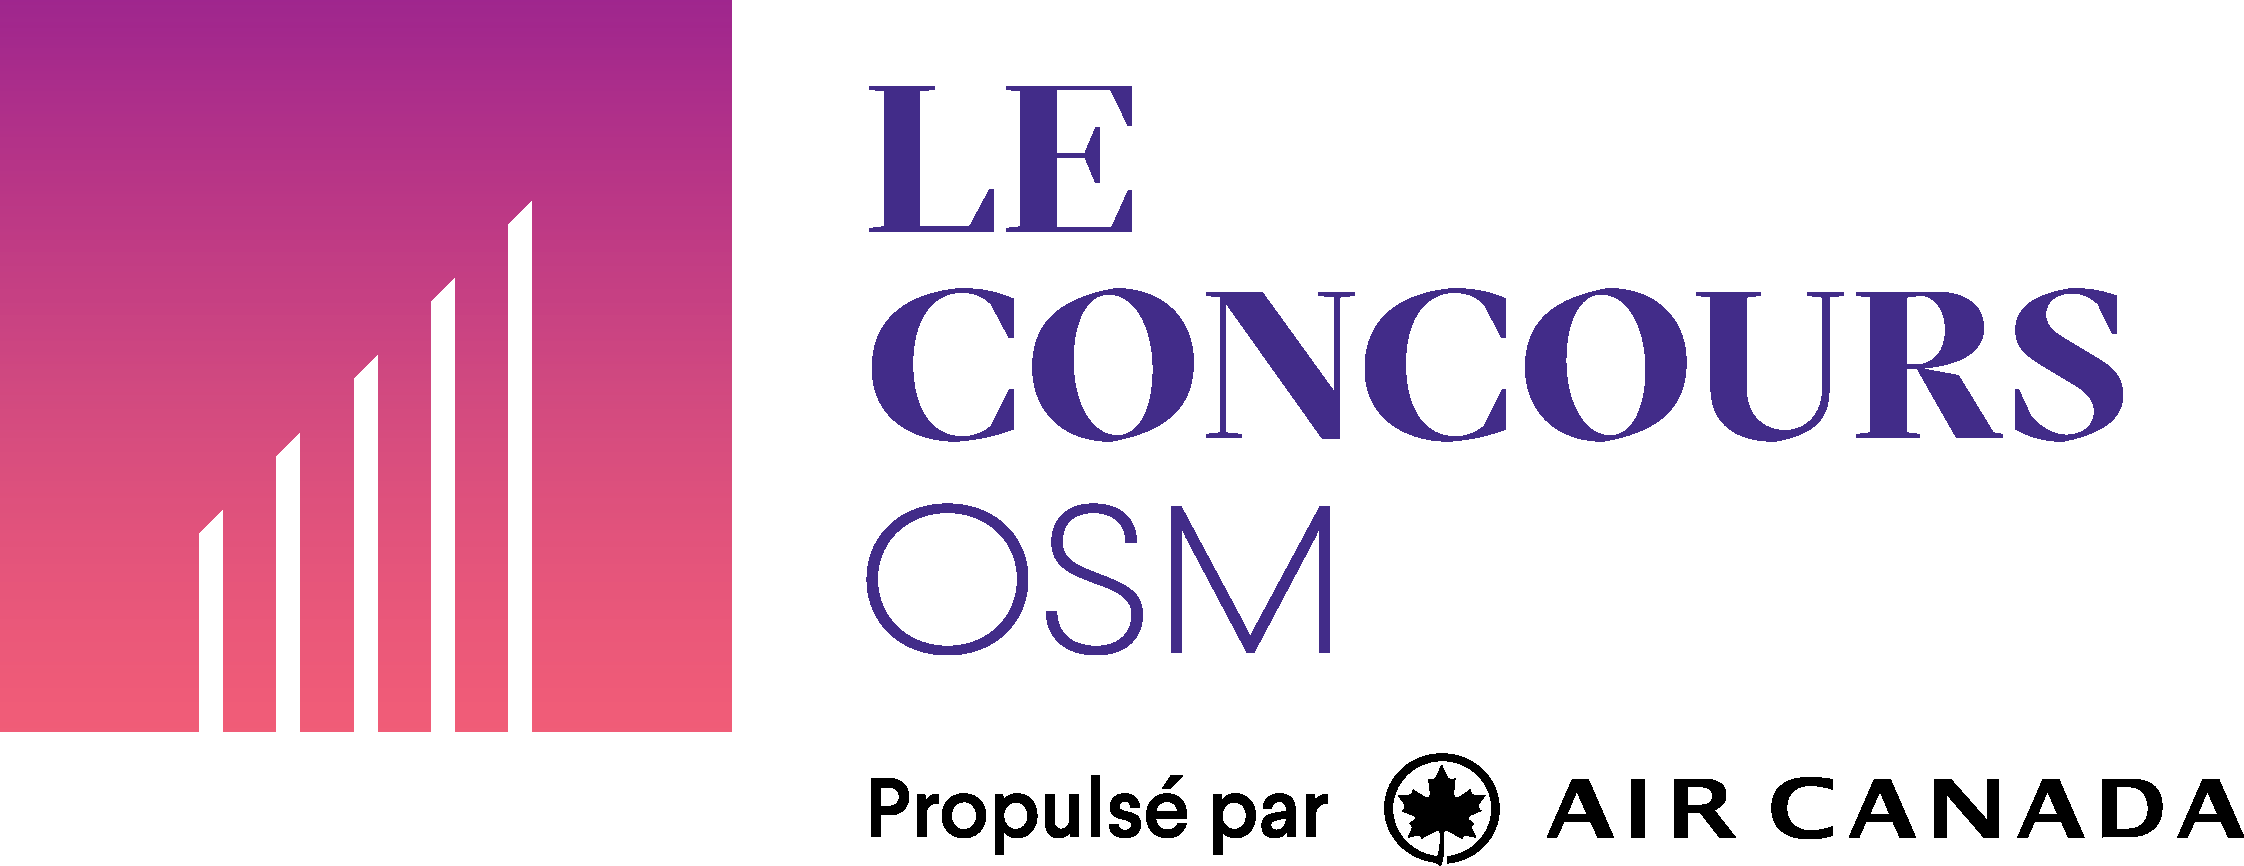 Concours OSM